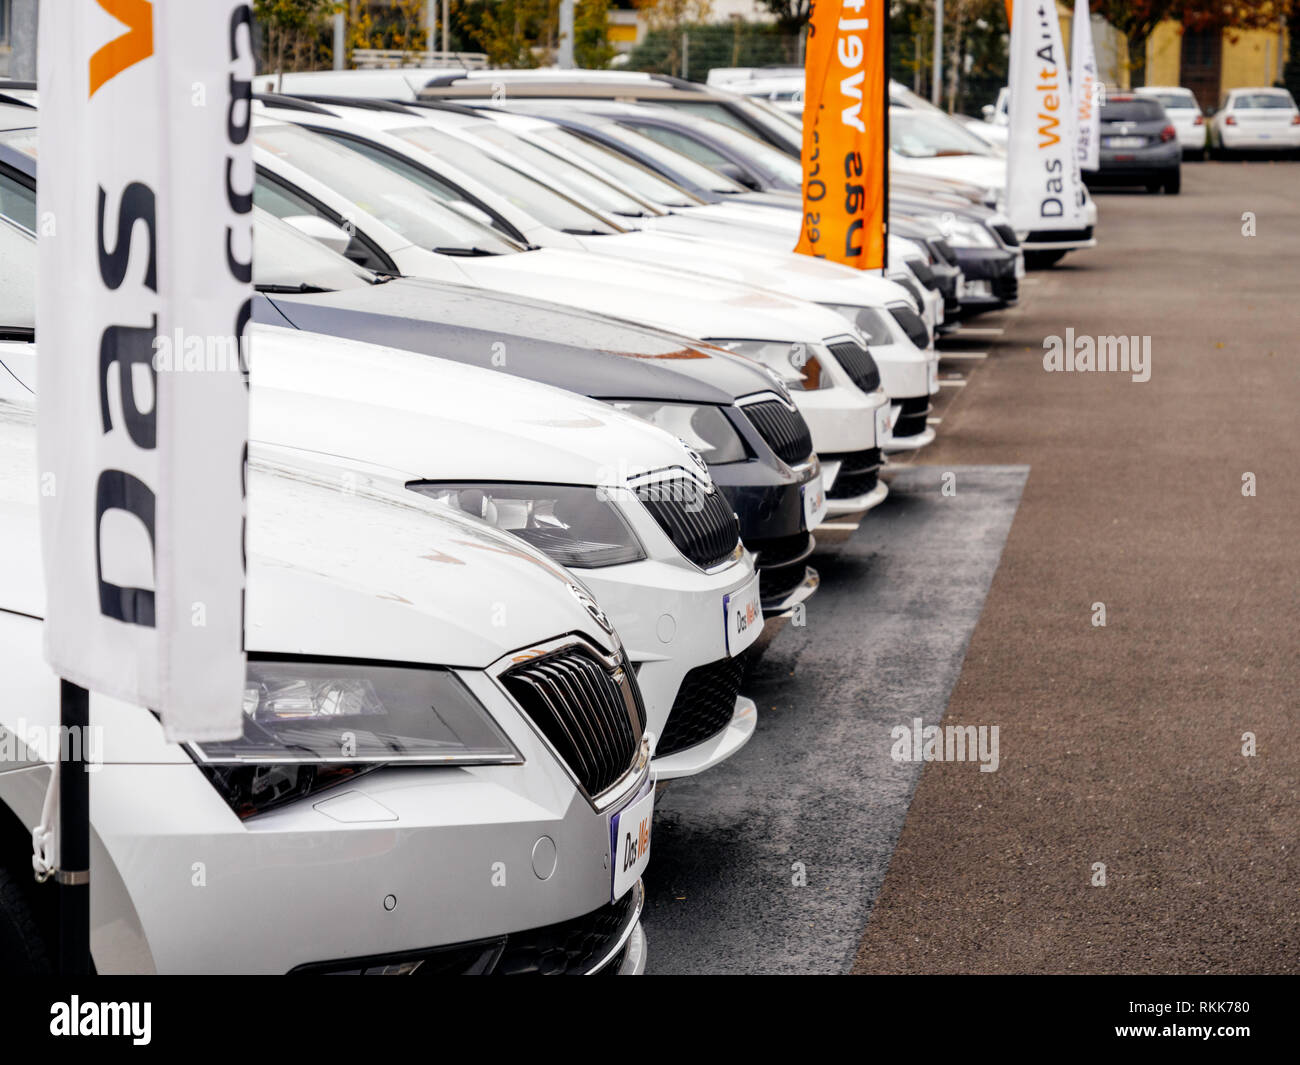 Strasbourg, France - Nov 7 2017: Perspective view - rows of new cars for sale large stock in wide parking lot - Czech Skoda car dealer inventory Stock Photo